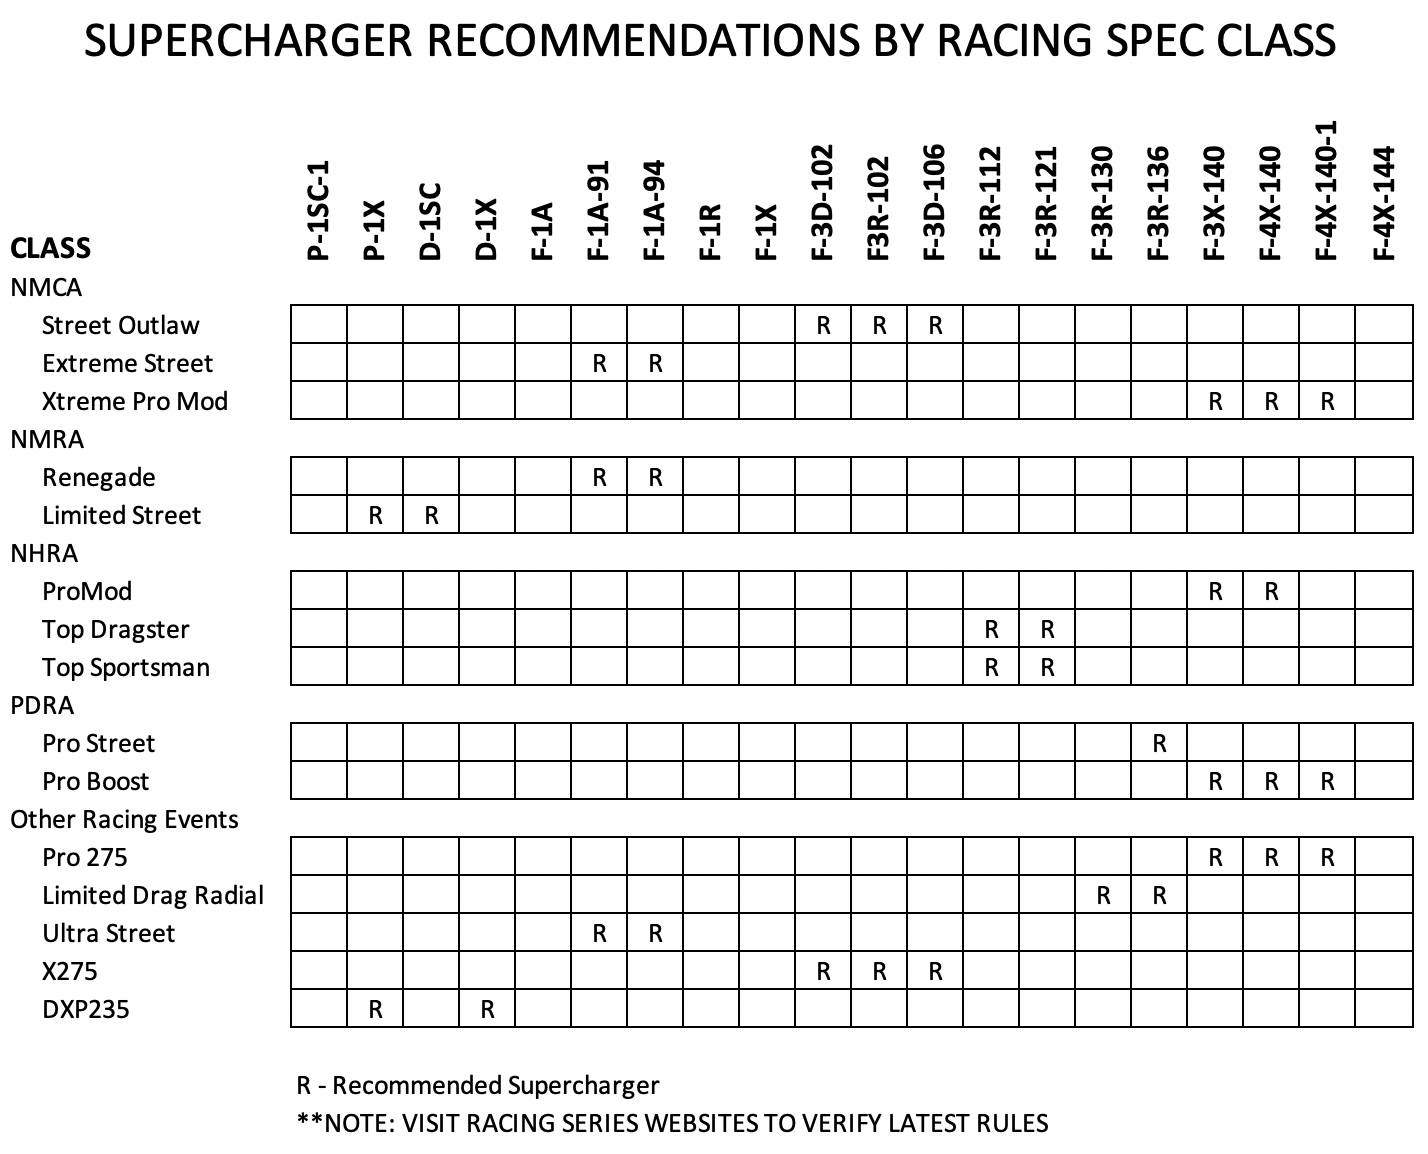 Supercharger Recommendation by Racing Spec Class